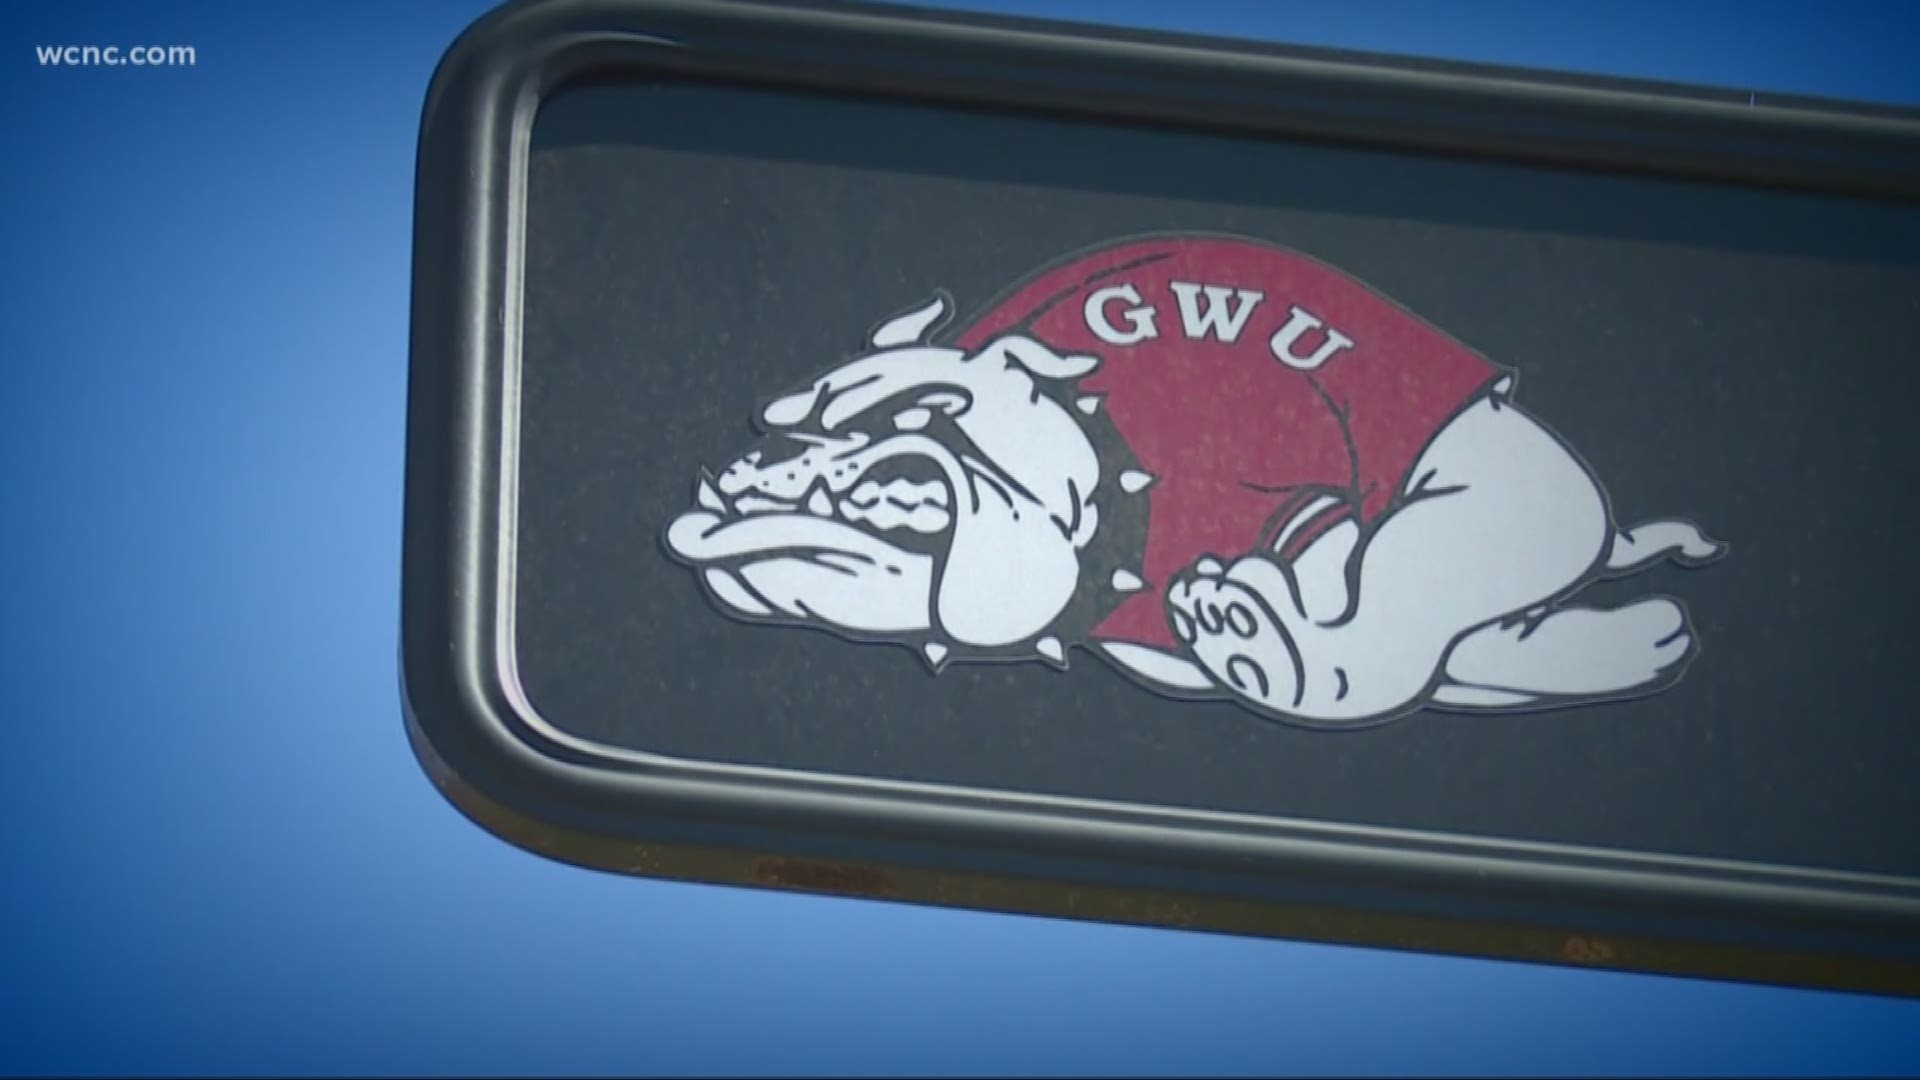 Gardner-Webb, a liberal arts school in Boiling Springs, will make its first ever appearance in the tournament. Now, the peaceful school in the foothills is buzzing about basketball.